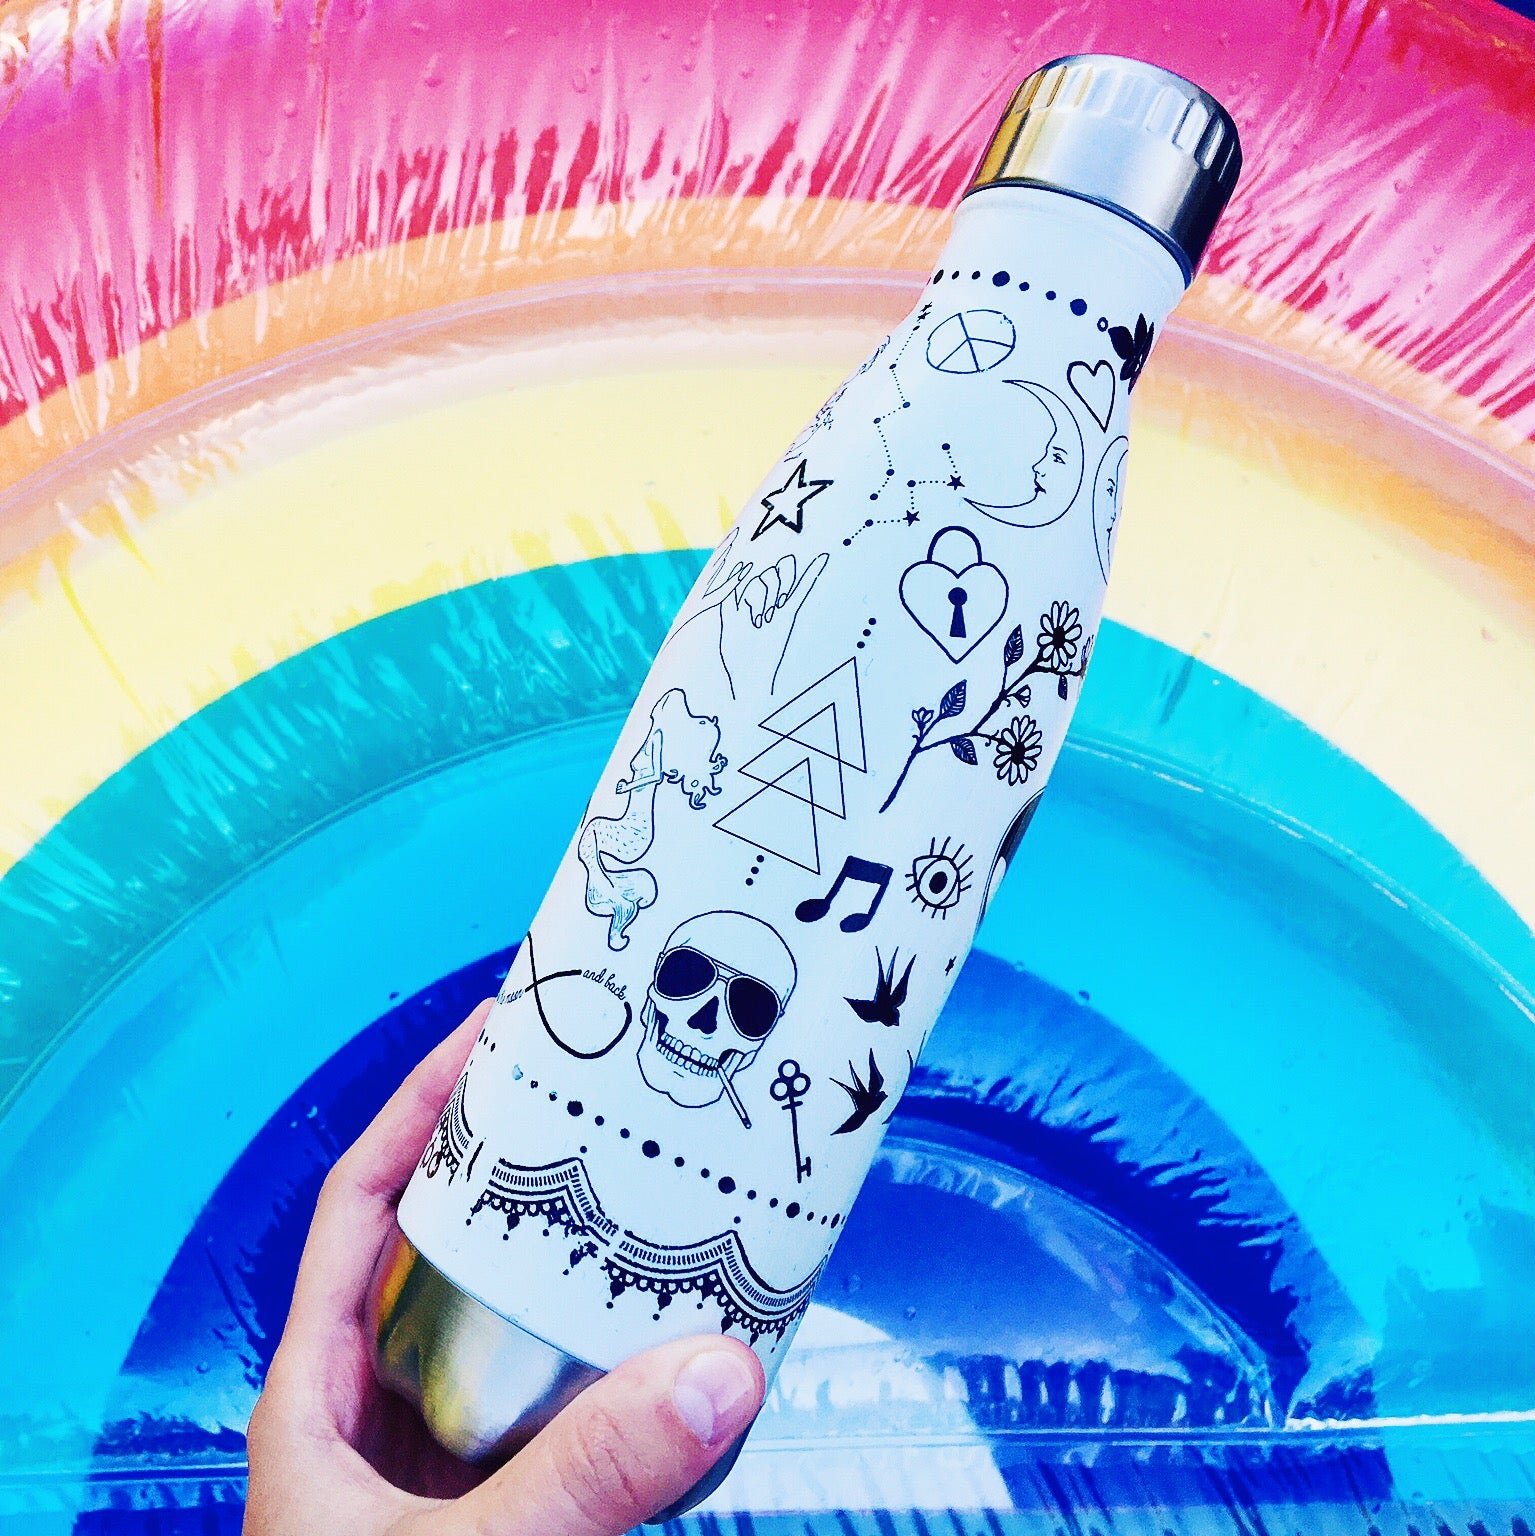 Stay Hydrated with INKED & Swell!